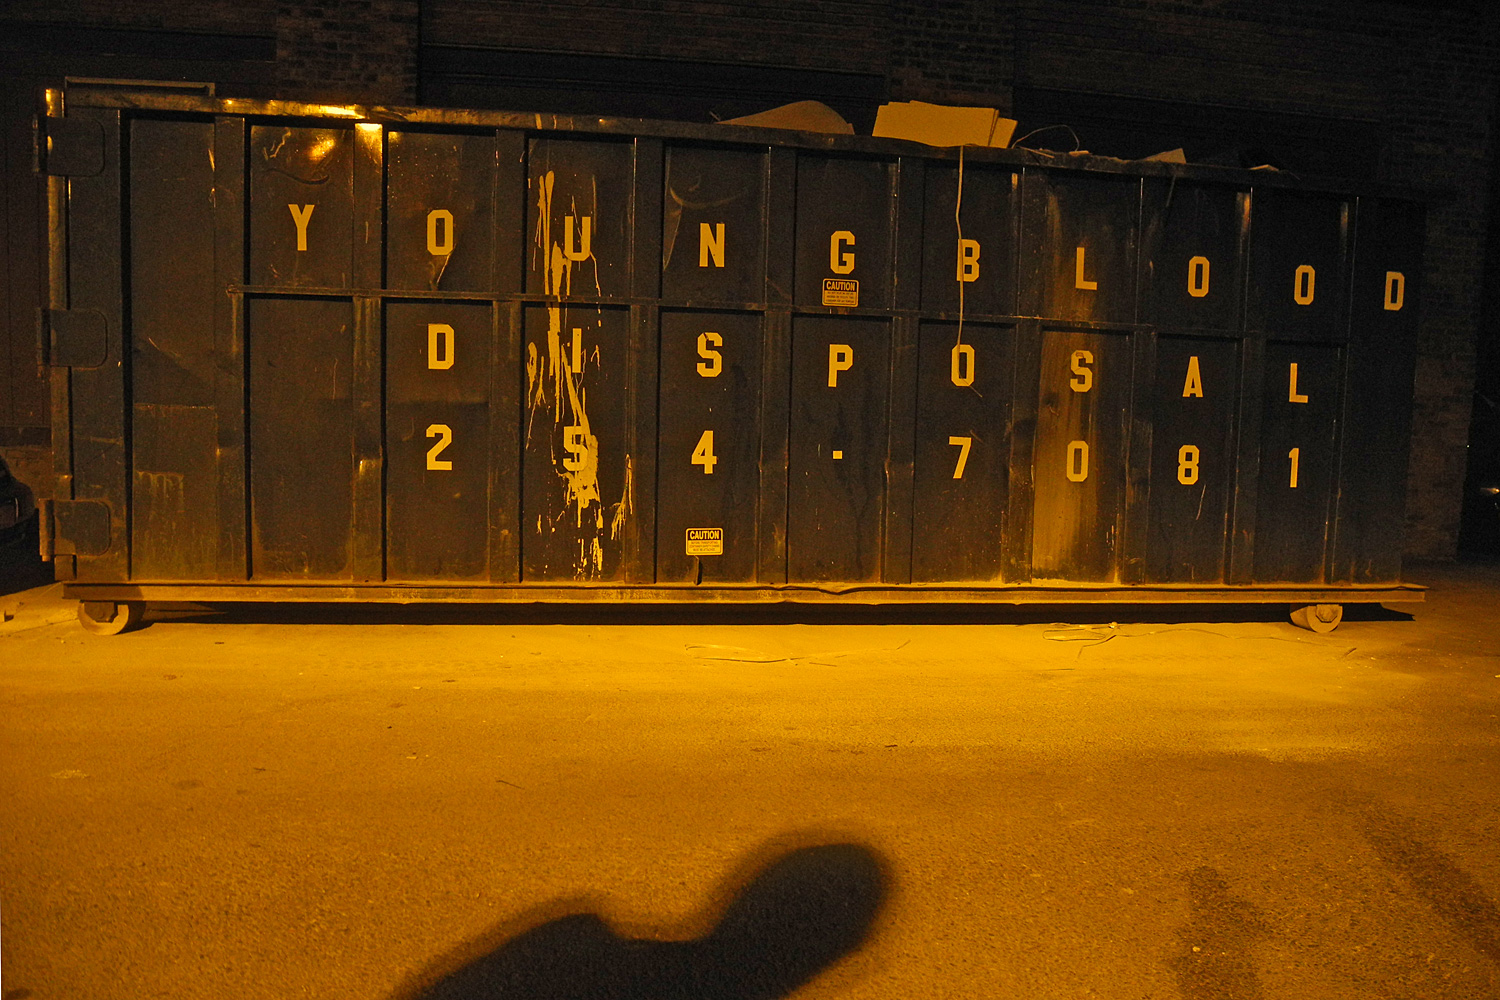 Dumpster 16, ongoing series of dumpster photos by Paul Dodd